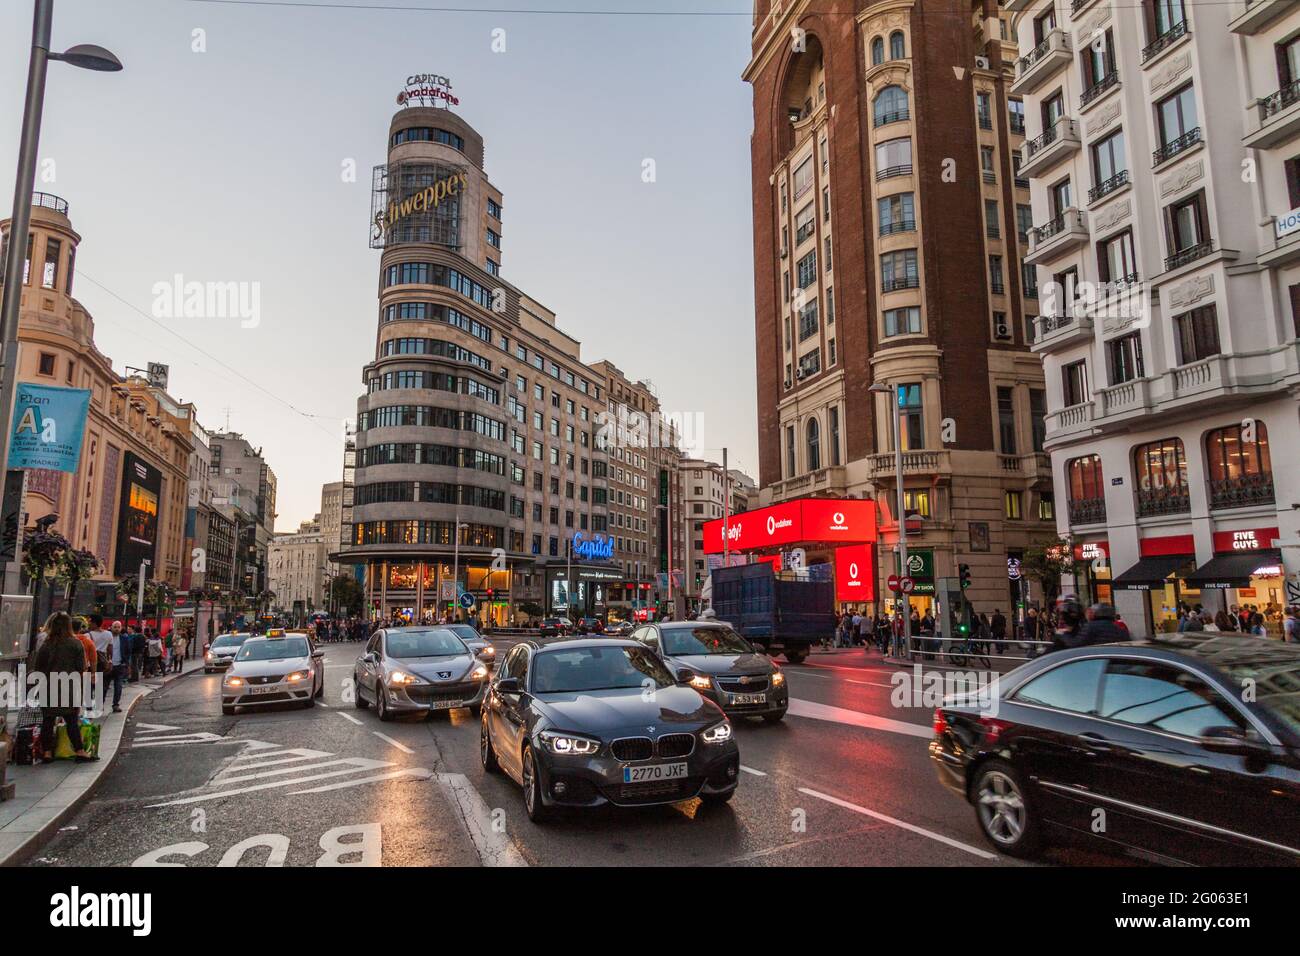 MADRID, SPAIN - OCTOBER 21, 2017: Calle Gran Via street and Carrion Building in Madrid. Stock Photo